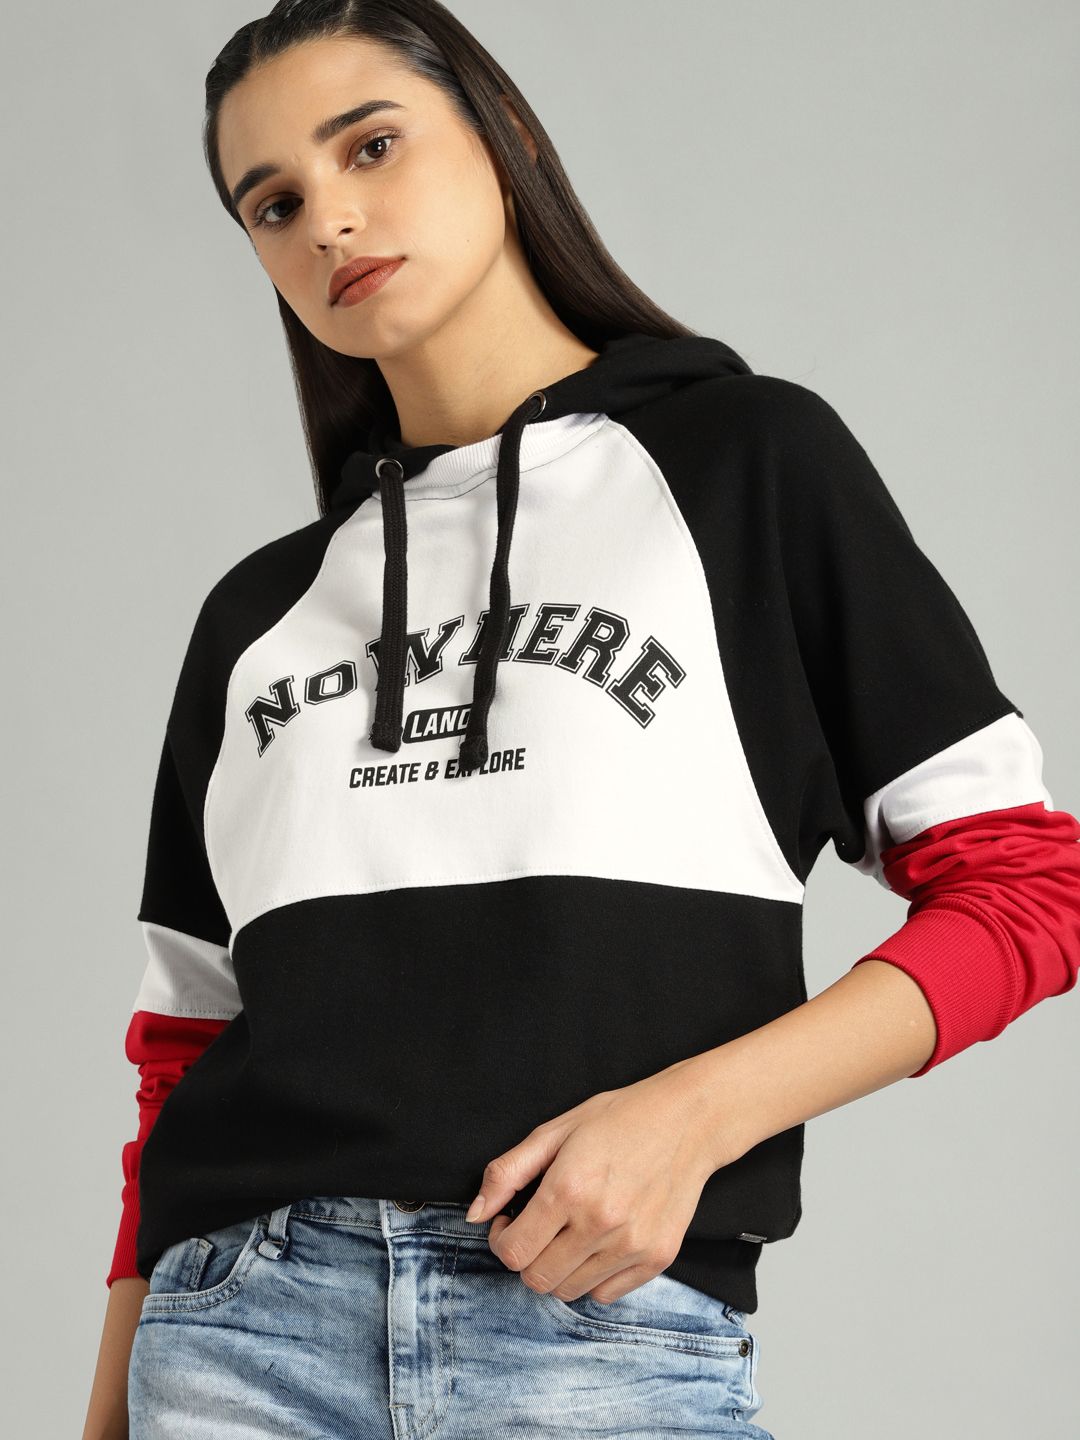 The Roadster Lifestyle Co Women Black & White Printed Hooded Sweatshirt Price in India